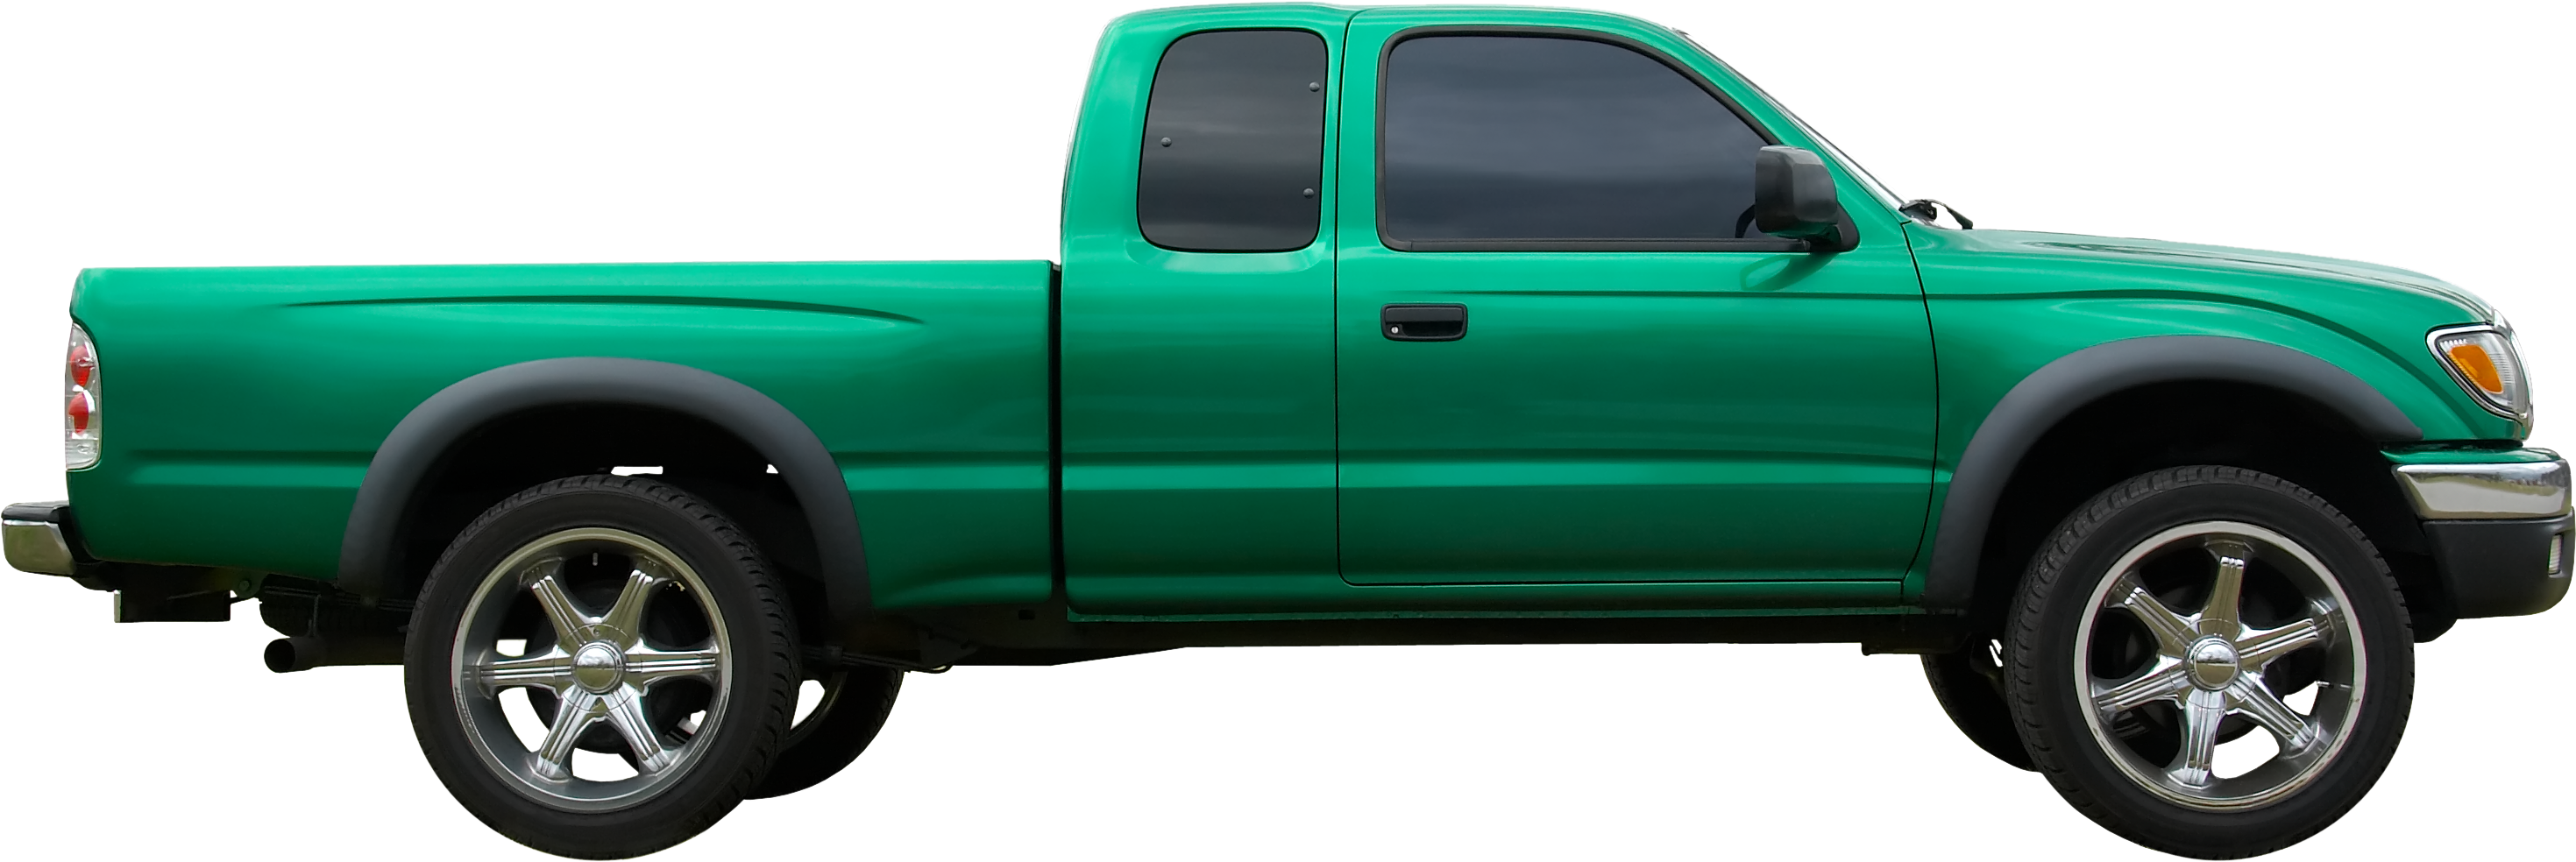 File:Green pickup truck.png  Wikimedia Commons